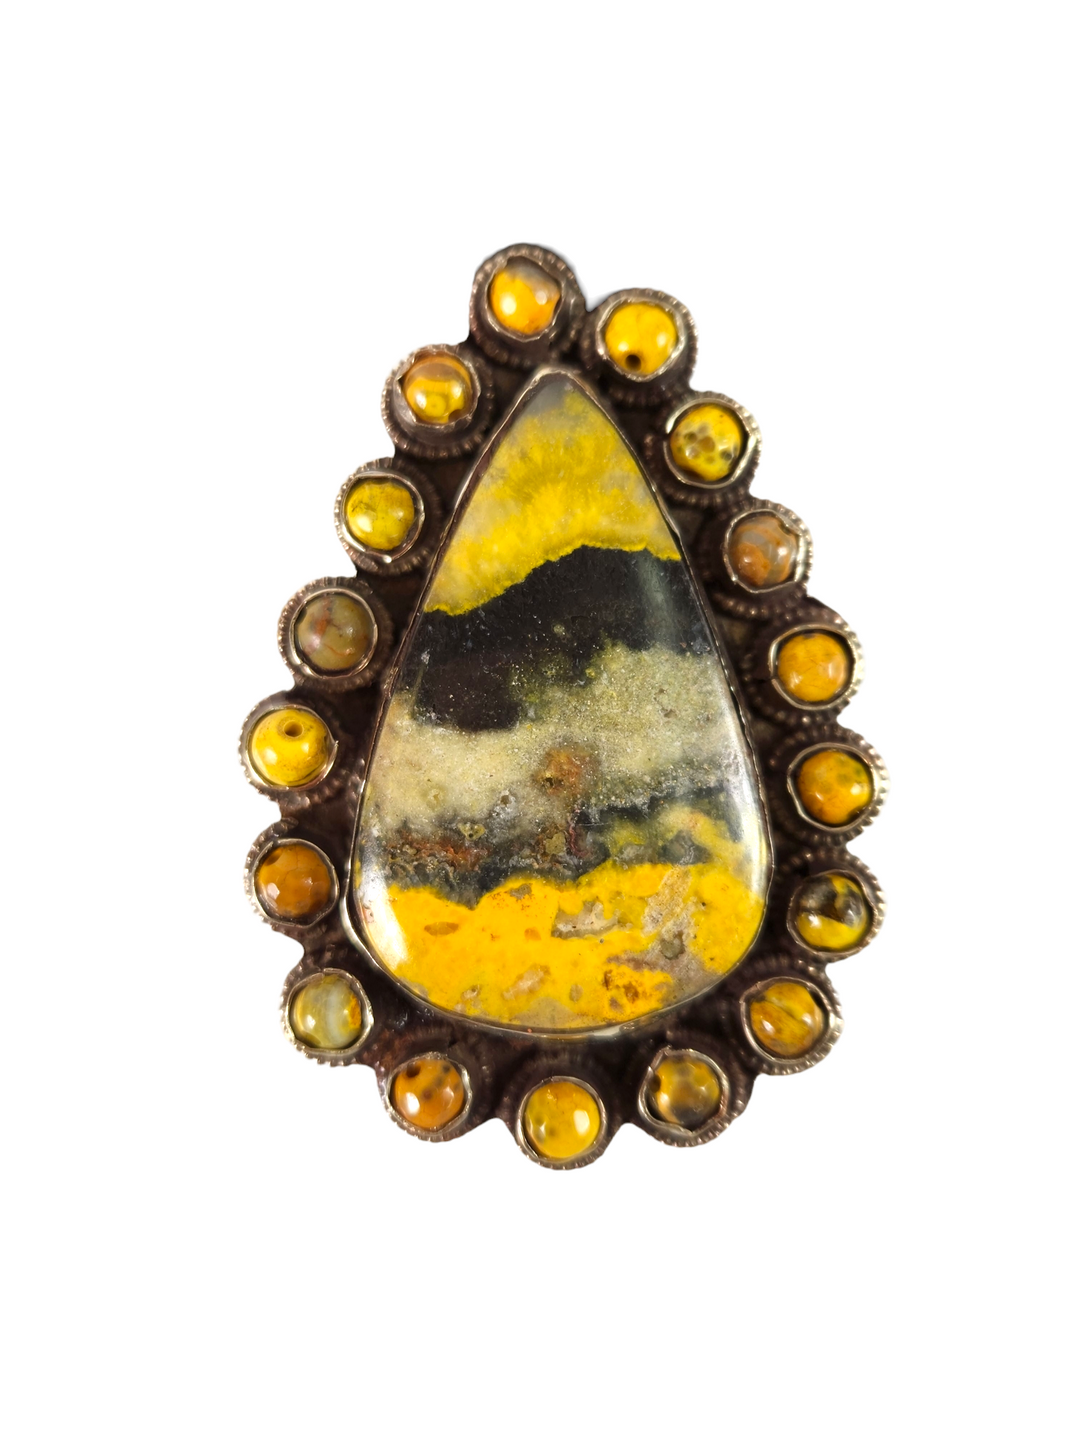 The Paige Bumble Bee Jasper Pendant Collection